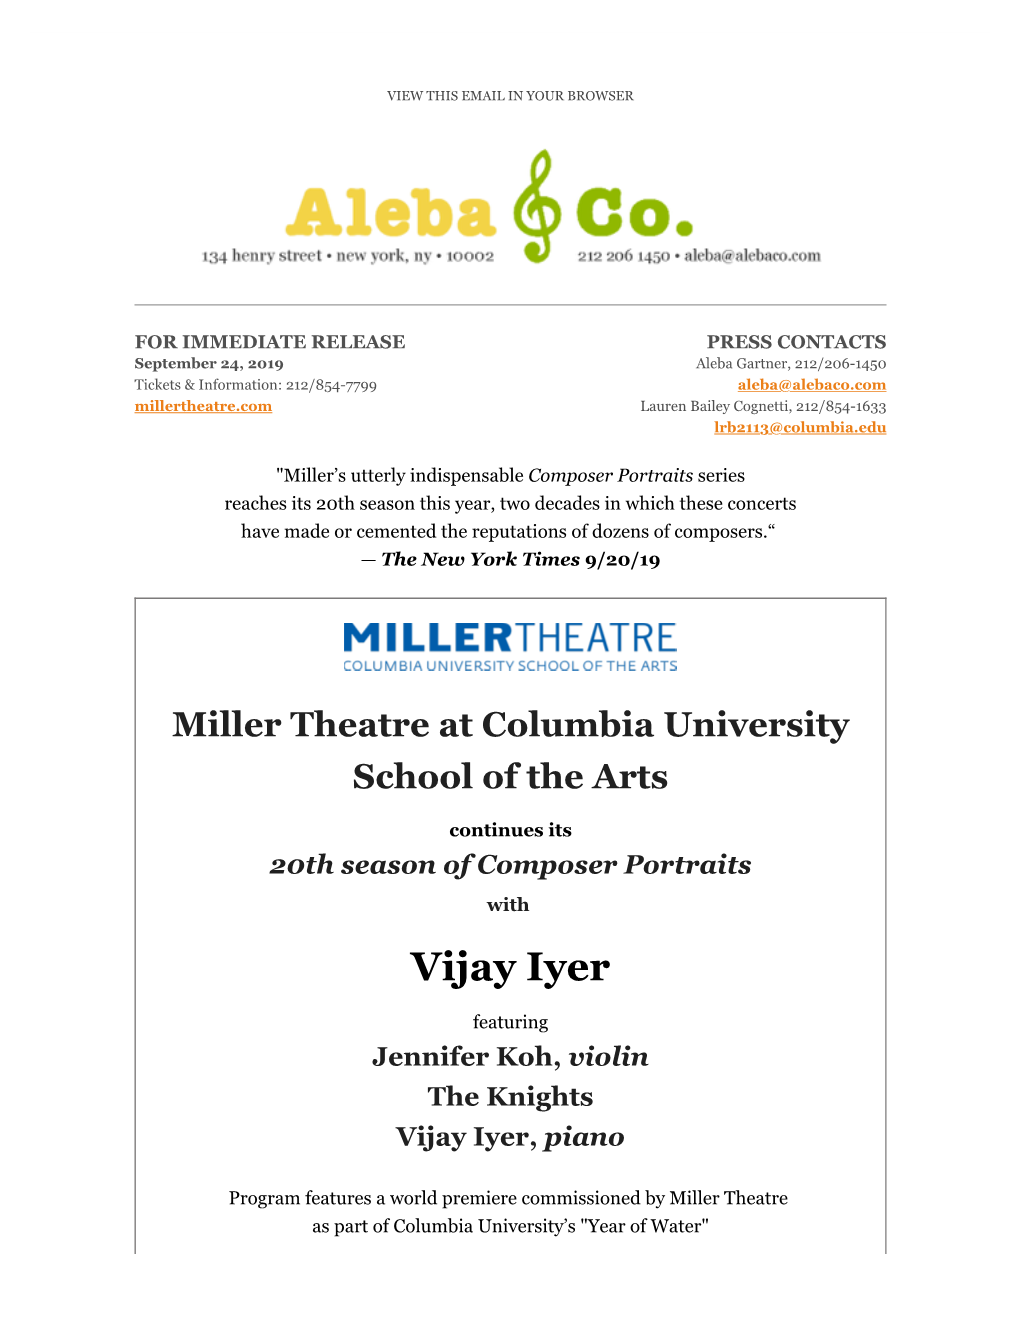 Miller Theatre Presents a Composer Portrait of VIJAY IYER, with Jennifer